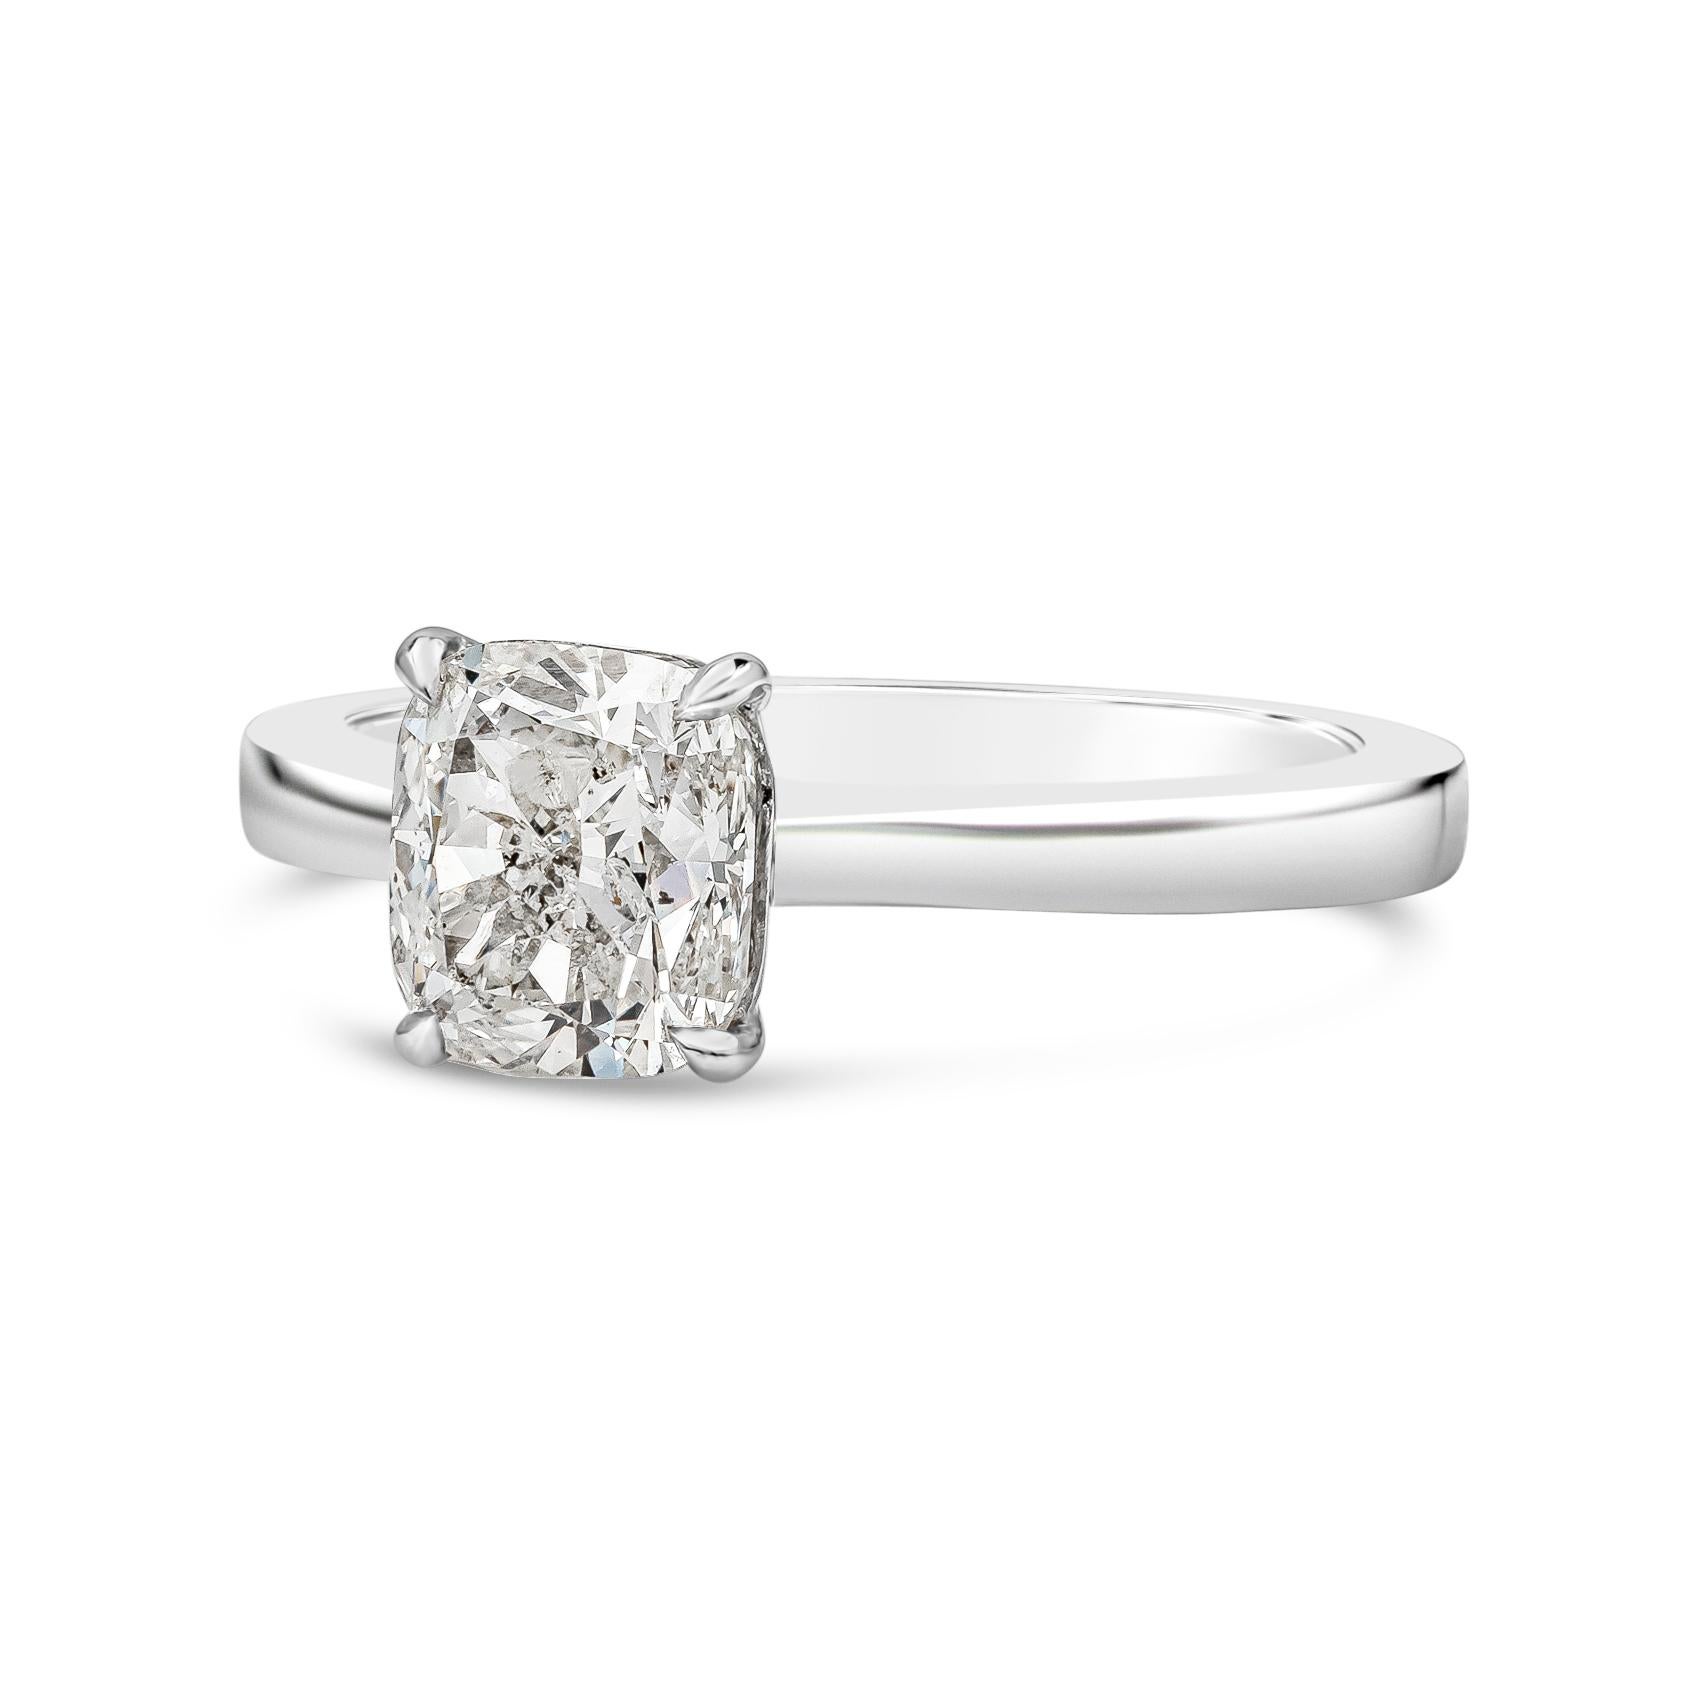 A simple and timeless solitaire design in polished platinum showcasing a 1.53 carat cushion cut diamond. Set in a traditional 4 prong basket on a tapered and comfort fit shank. Size 6.5 US (Sizable upon request).

Style available in different price